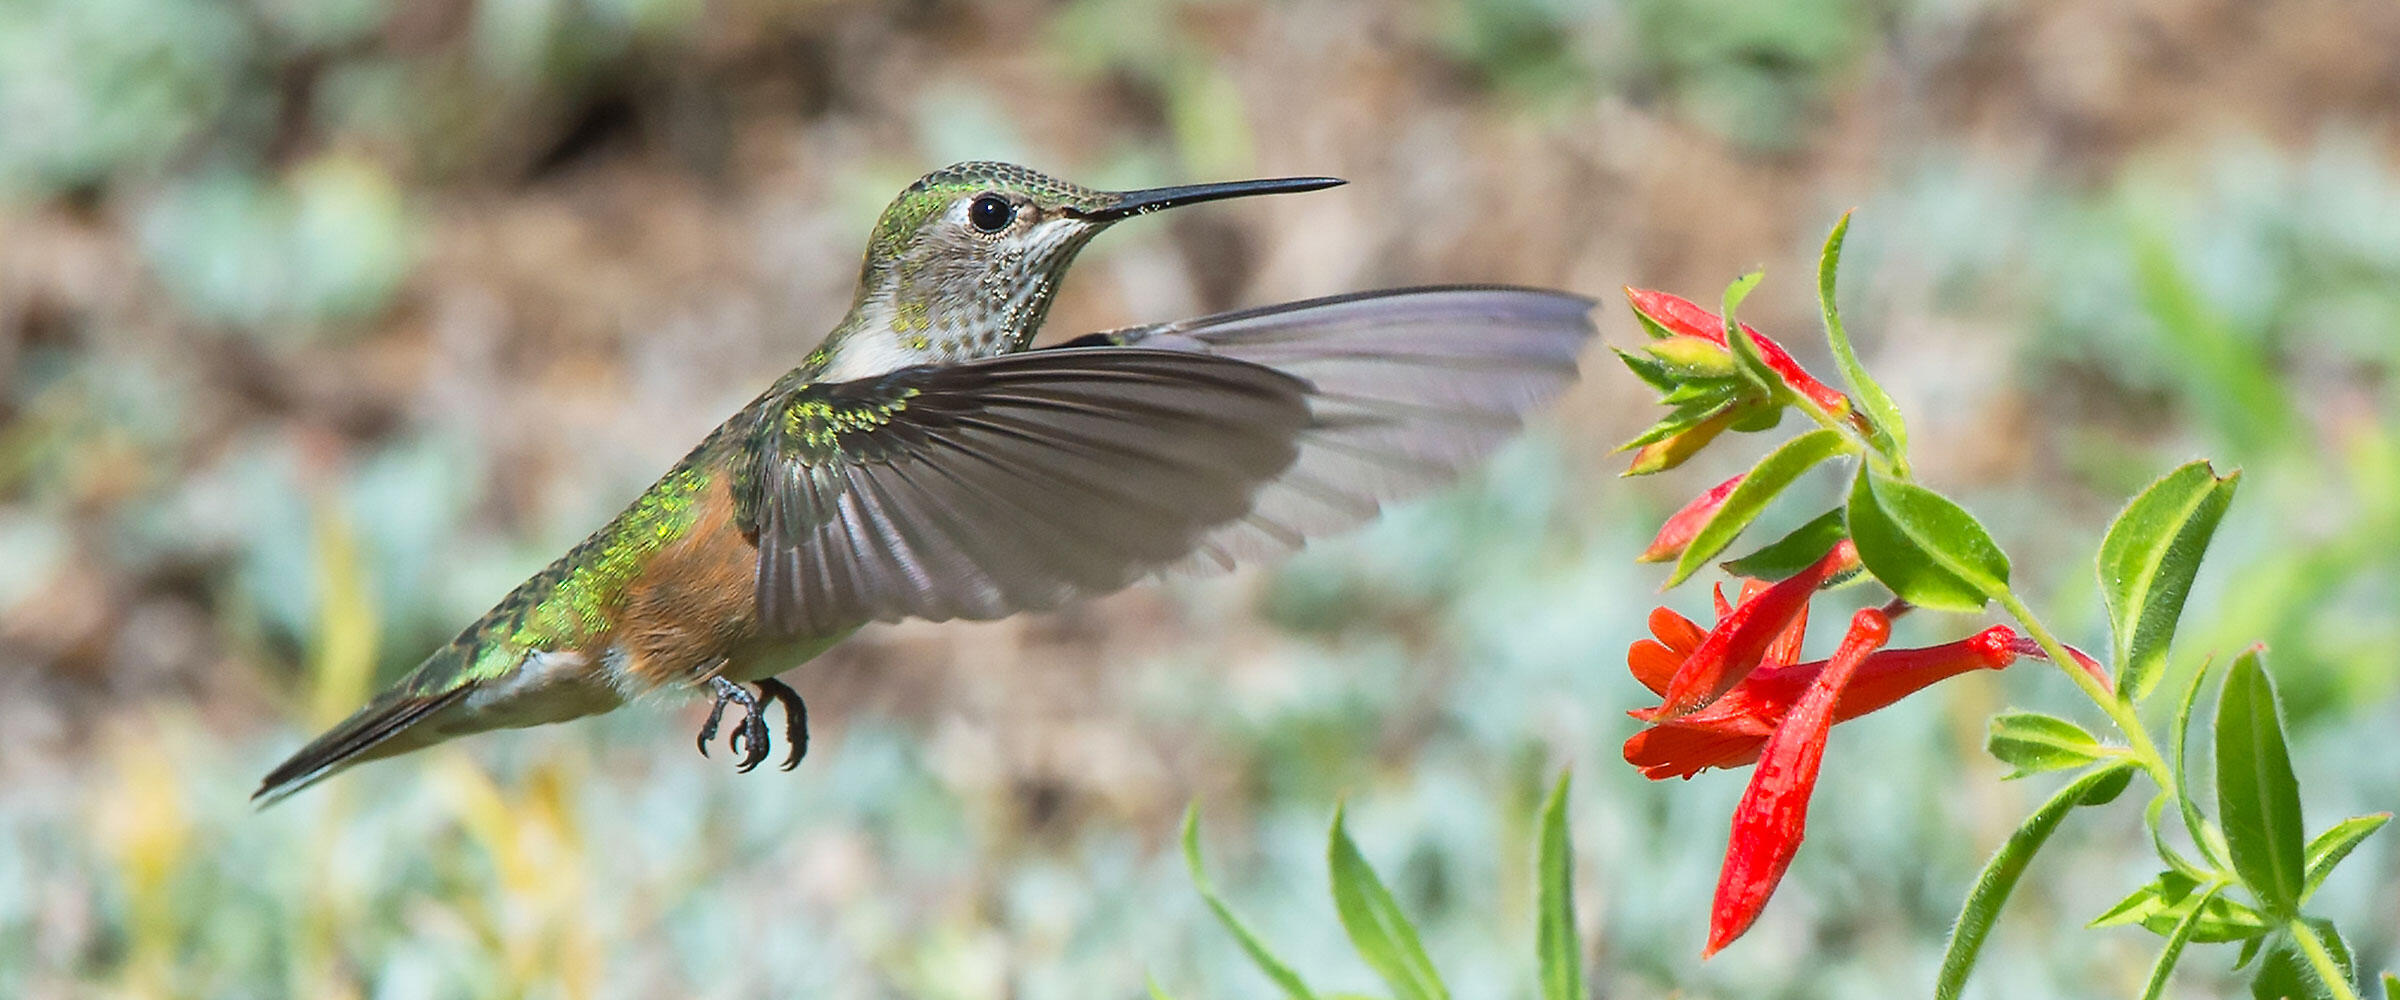 A female Broad-tailed Hummingbird hovers near red trumpet flowers.